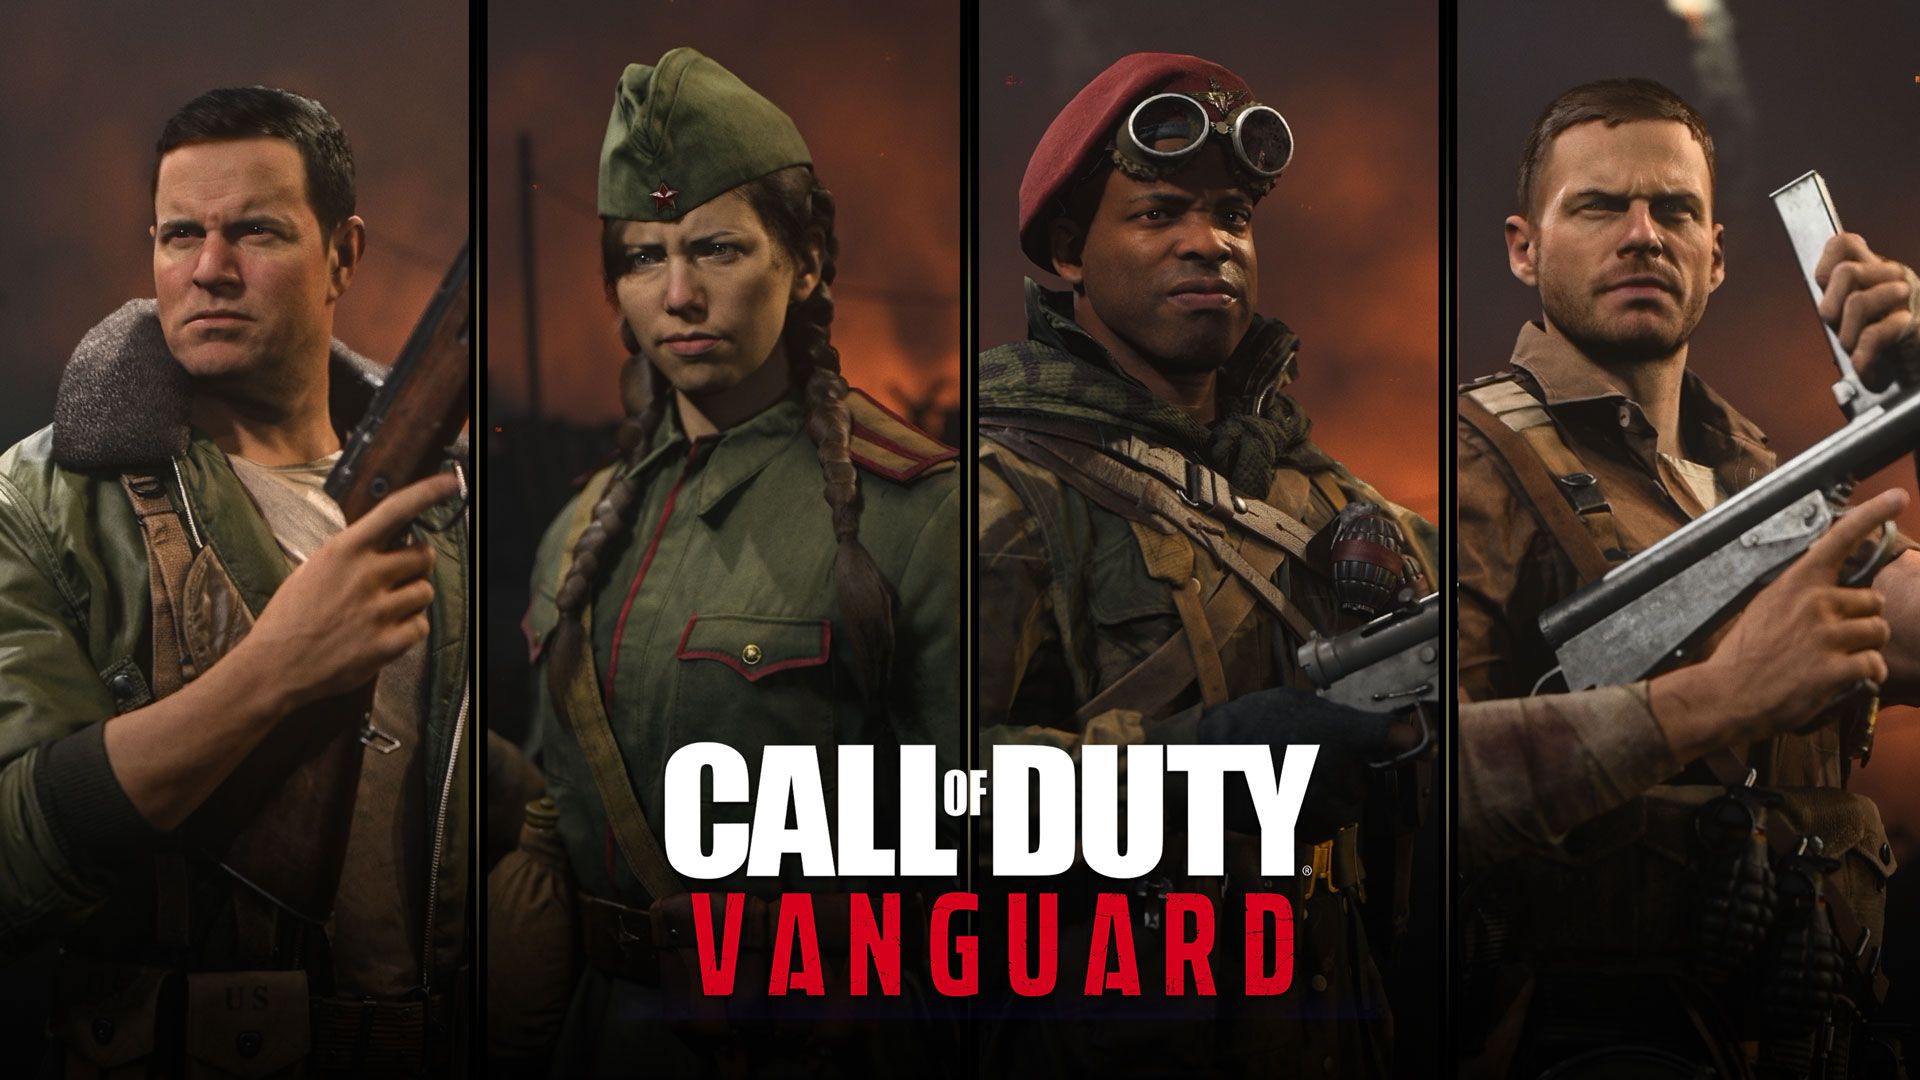 How To Fix Packet Burst In Call of Duty: Vanguard